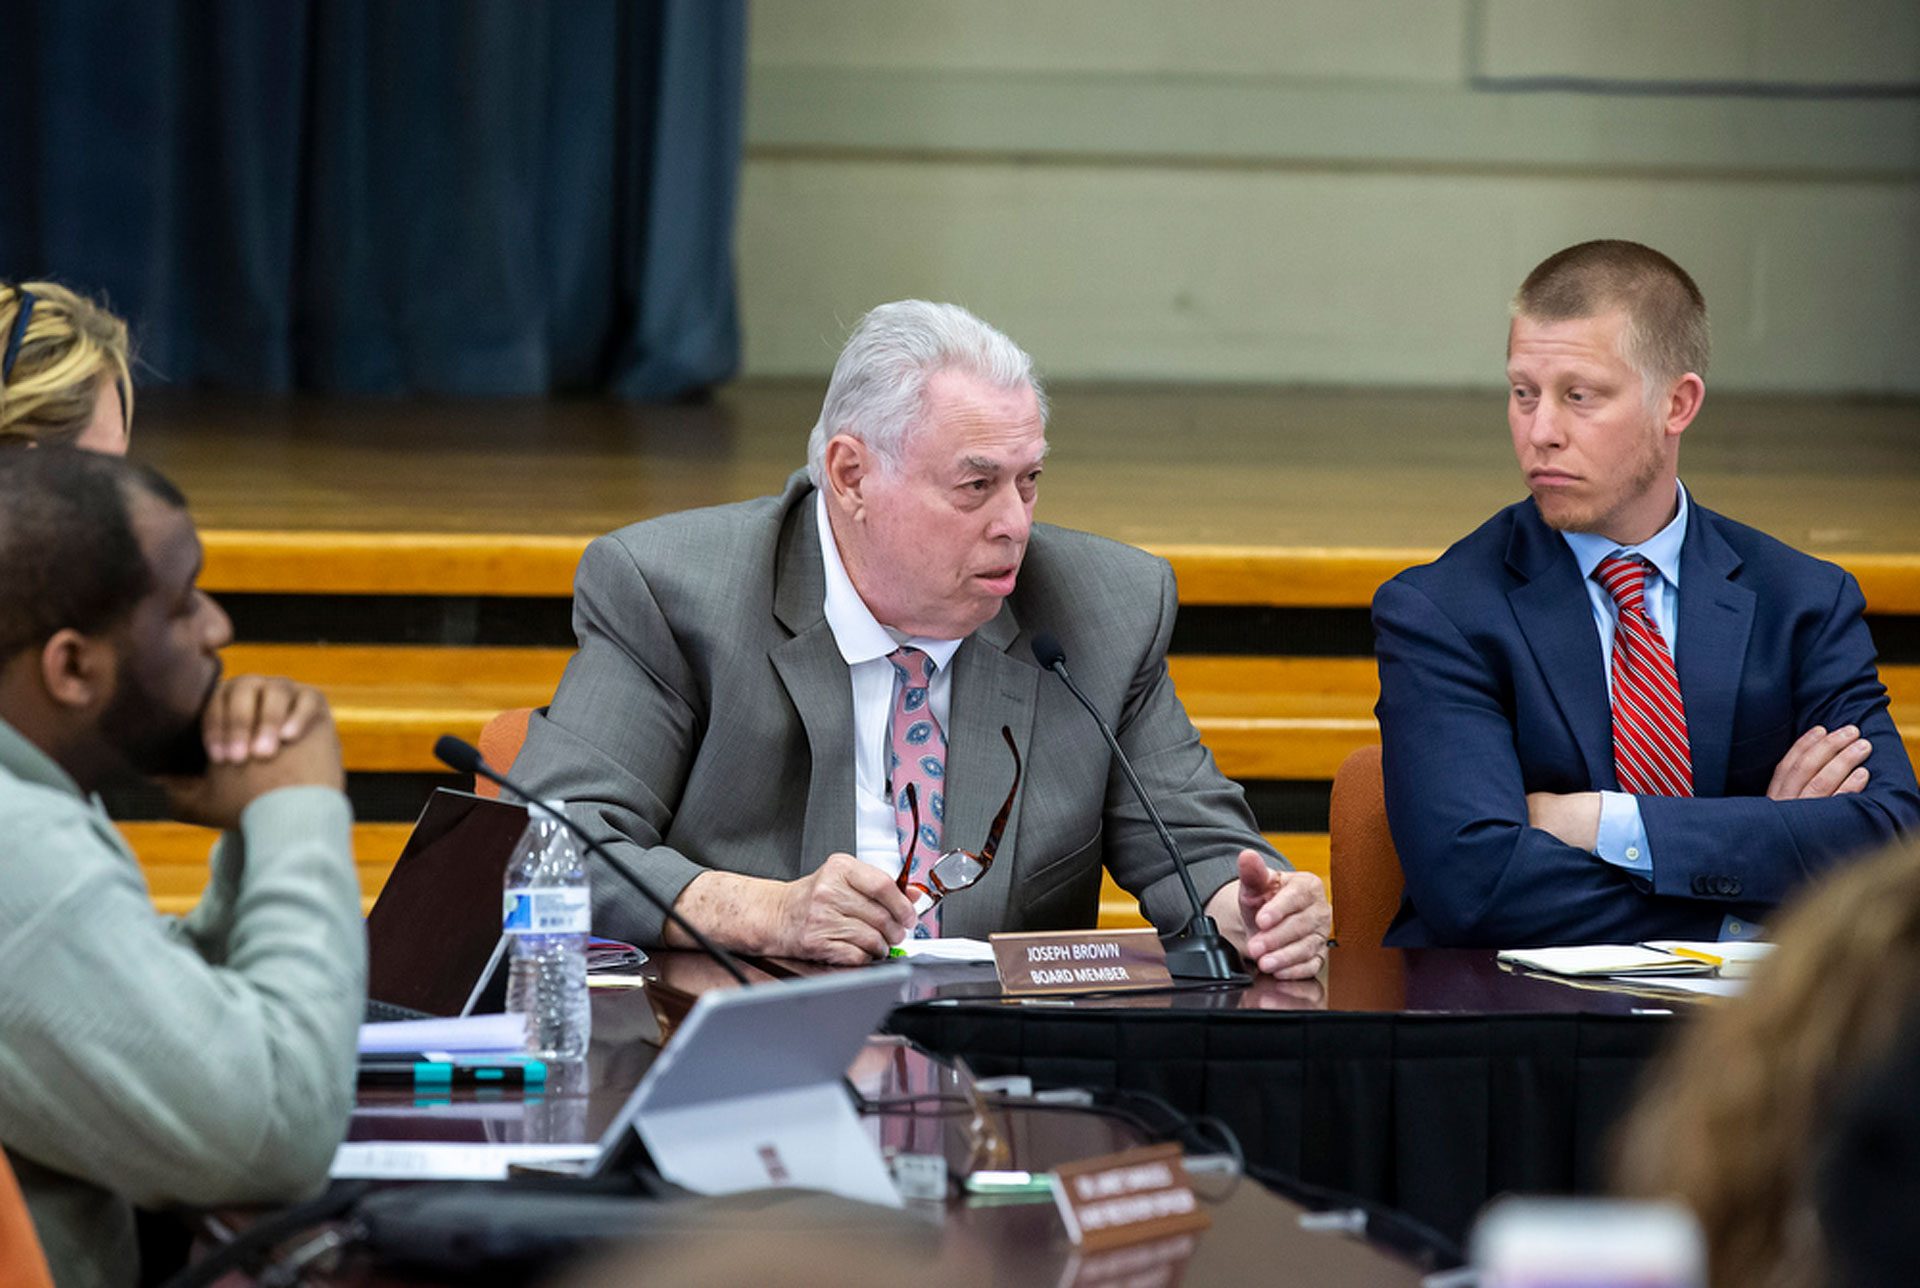 Harrisburg School District Board directors Joseph Brown and Judd Pittman during a special meeting to vote on hiring in-house solicitor James Ellison, Monday, April 22, 2019.